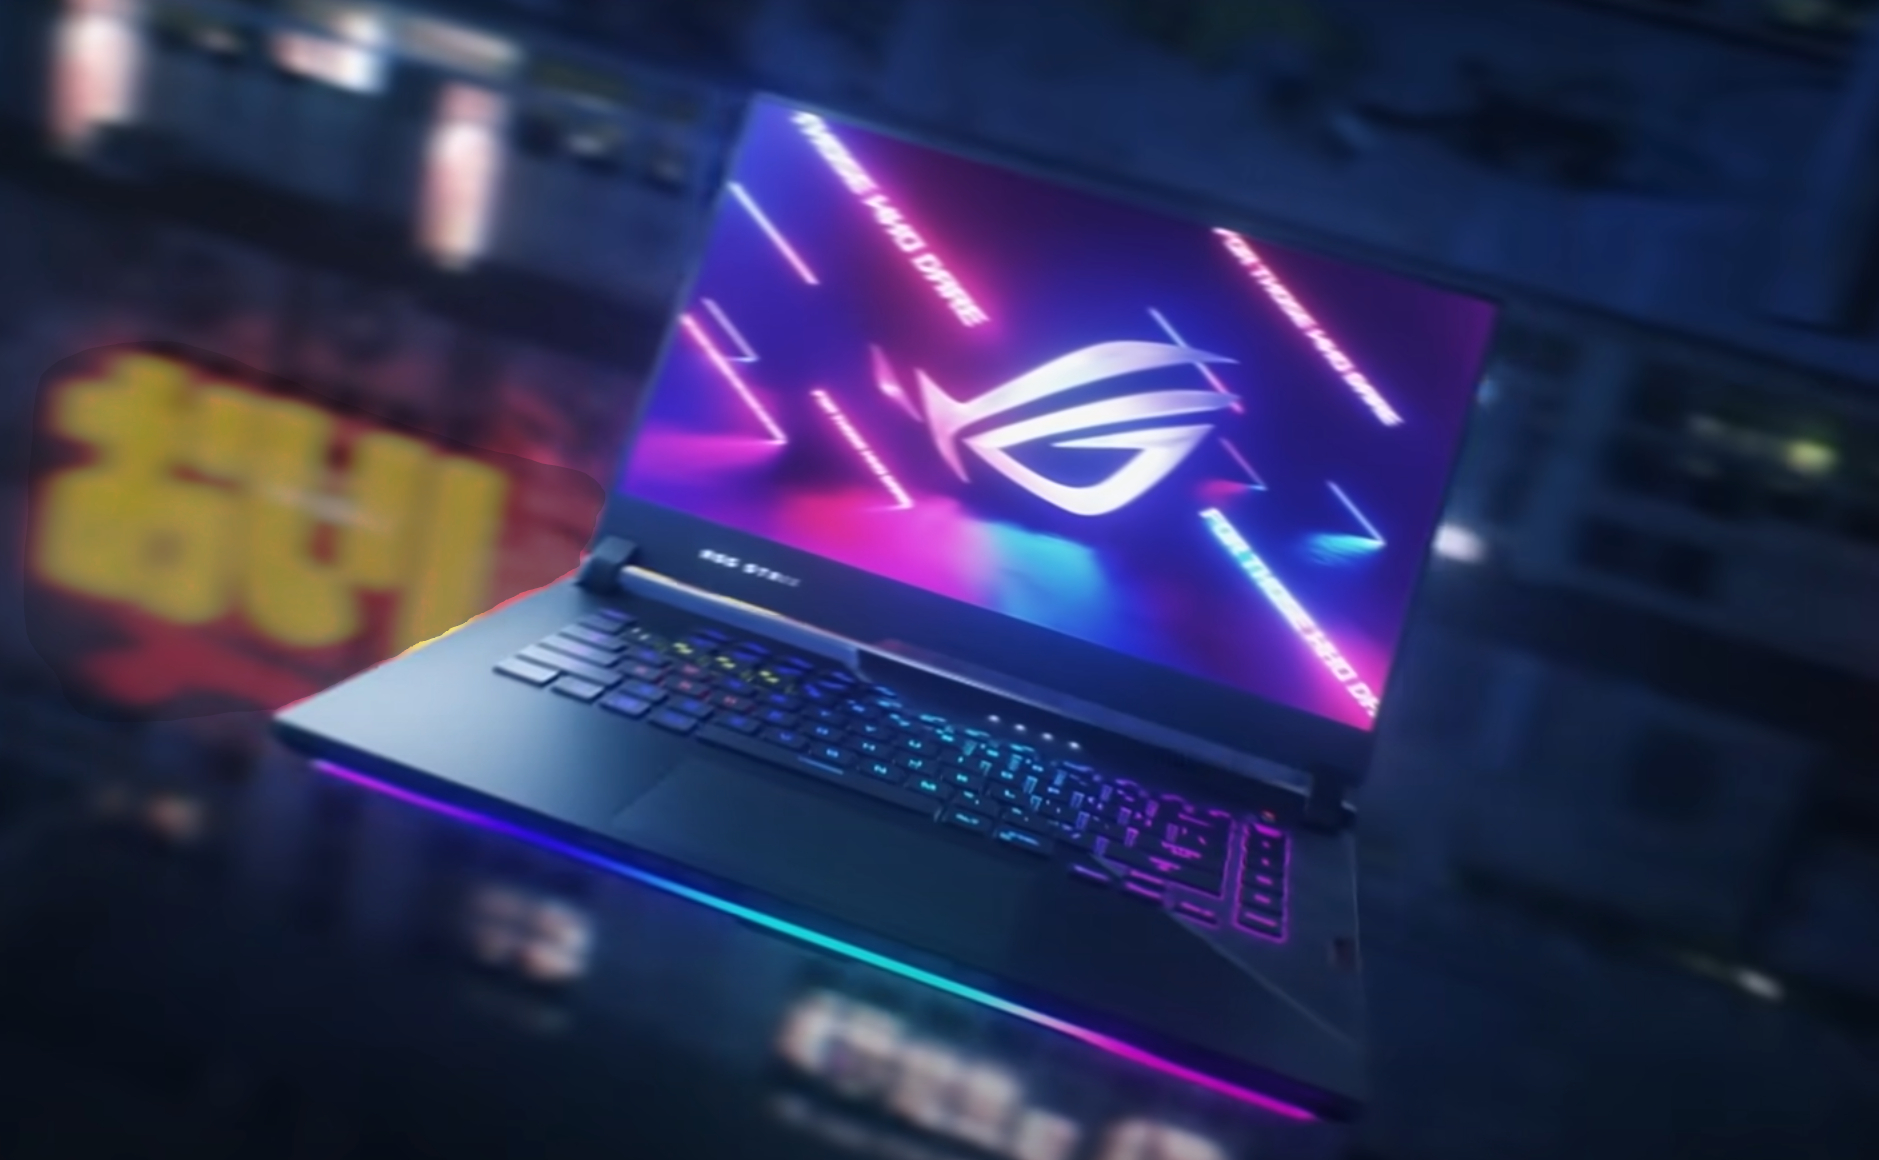 Grab the Asus ROG Strix Scar 17 gaming laptop at its lowest ever price